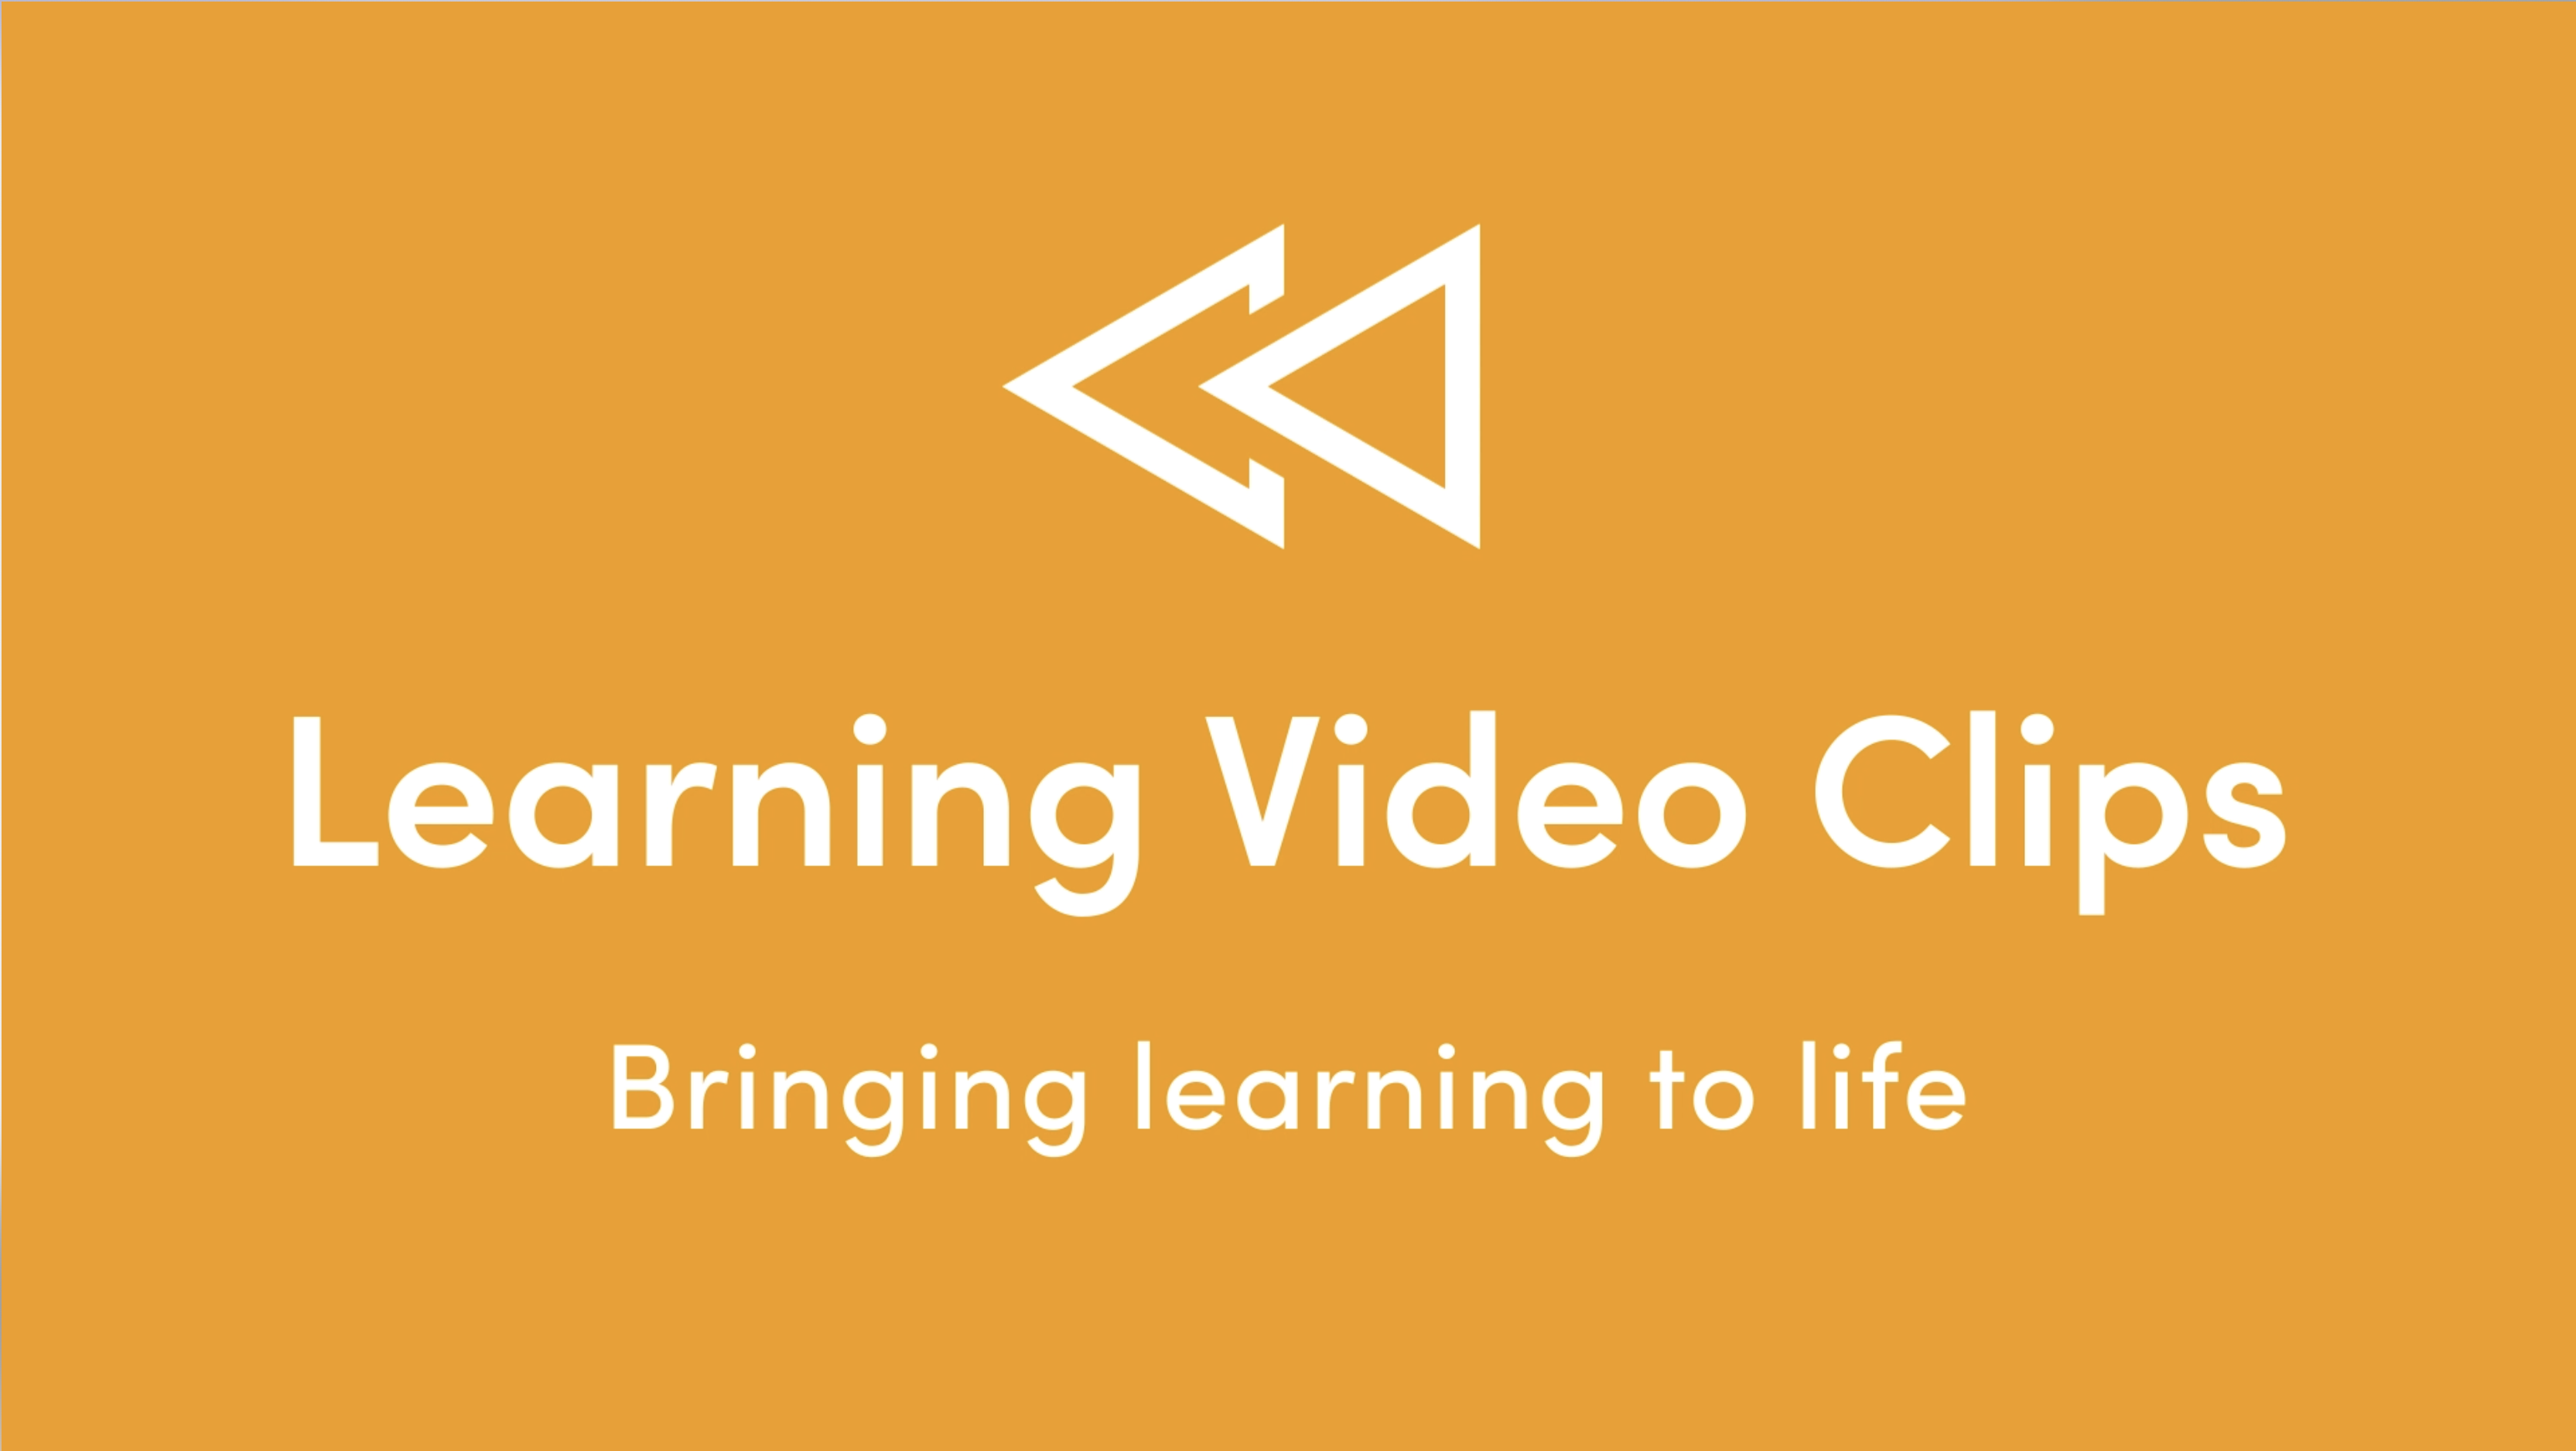 10 great ways to get the most out of our new Learning Video Clips